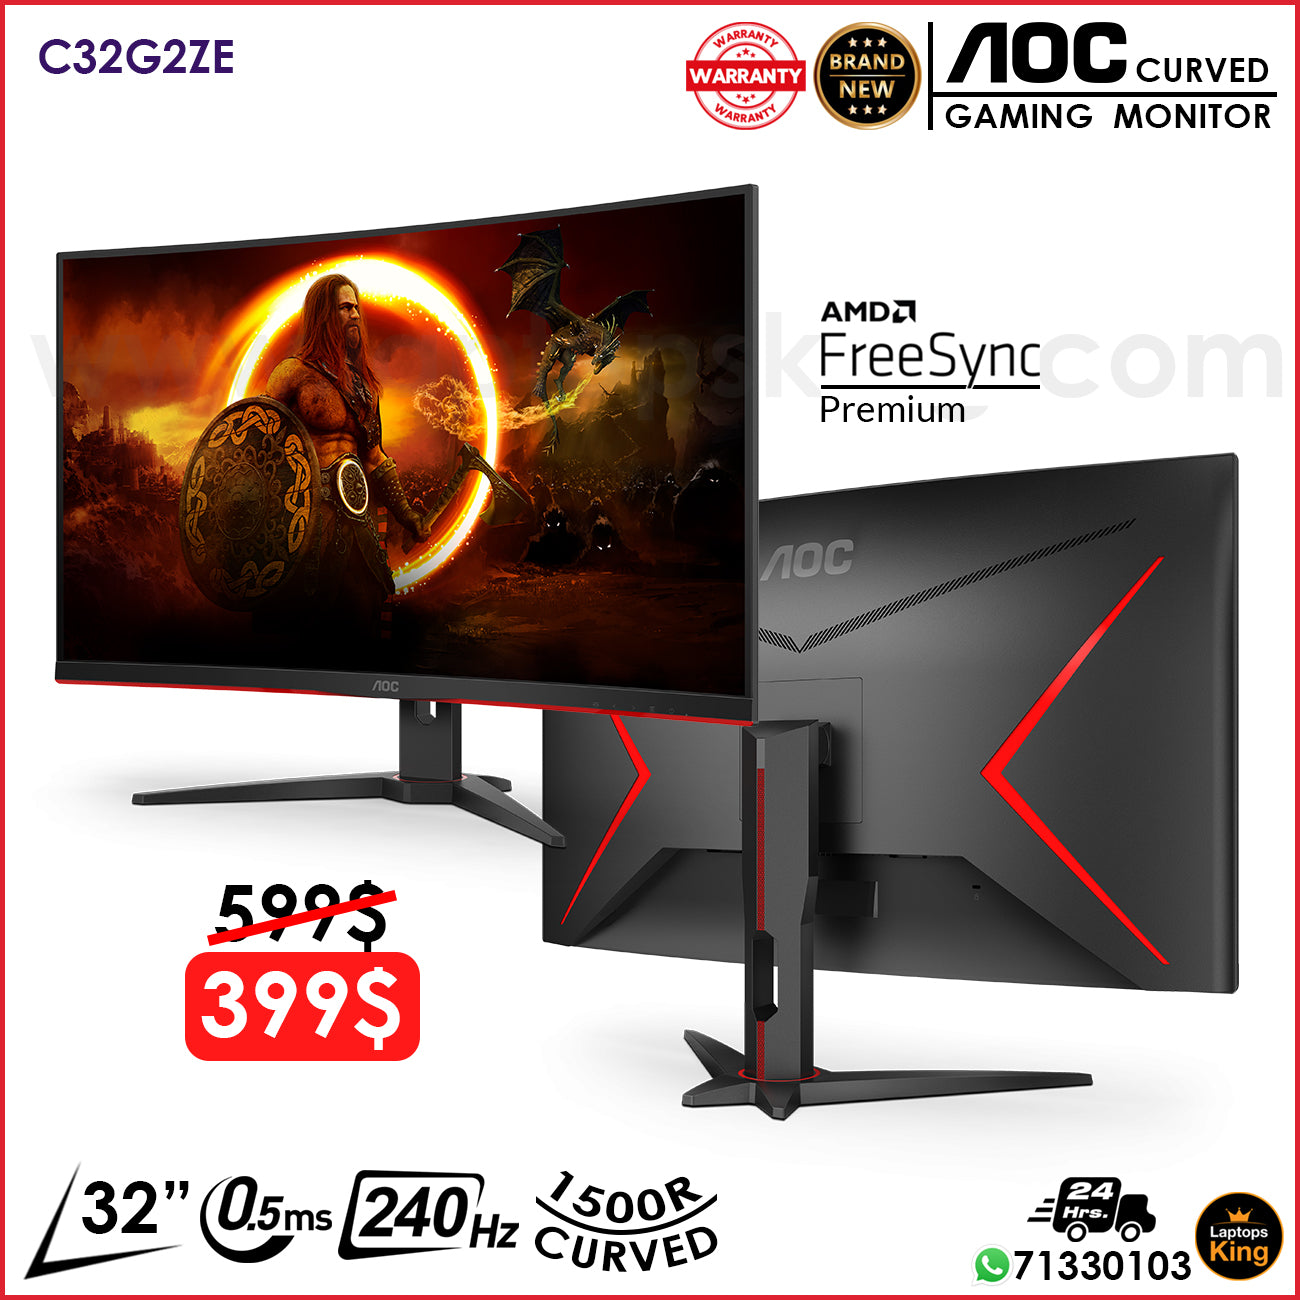 AOC C32G2ZE 32" Fhd 240hz 0.5ms Curved Gaming Monitor (Brand New)